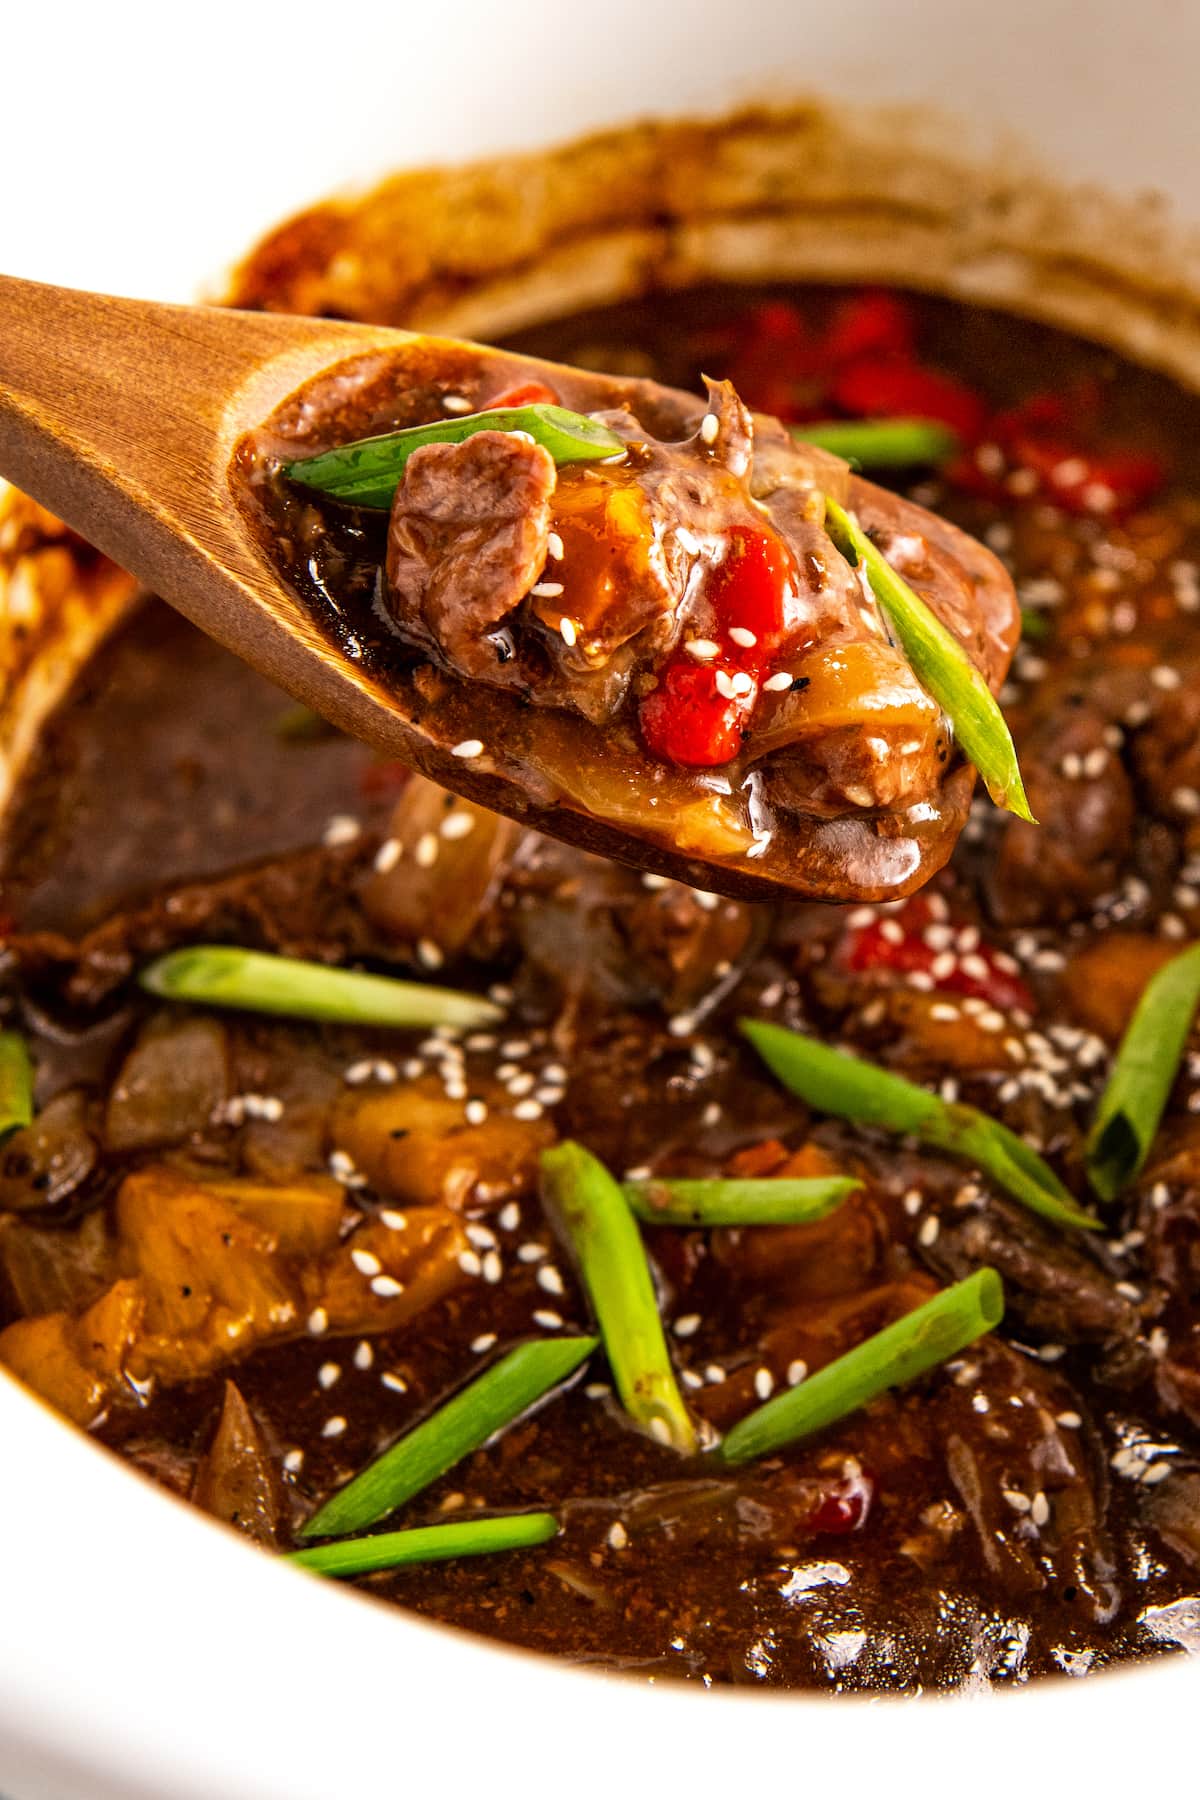 A wooden spoon dishing out a serving of crockpot pepper steak with bell peppers and onions smothered in a savory brown sauce.